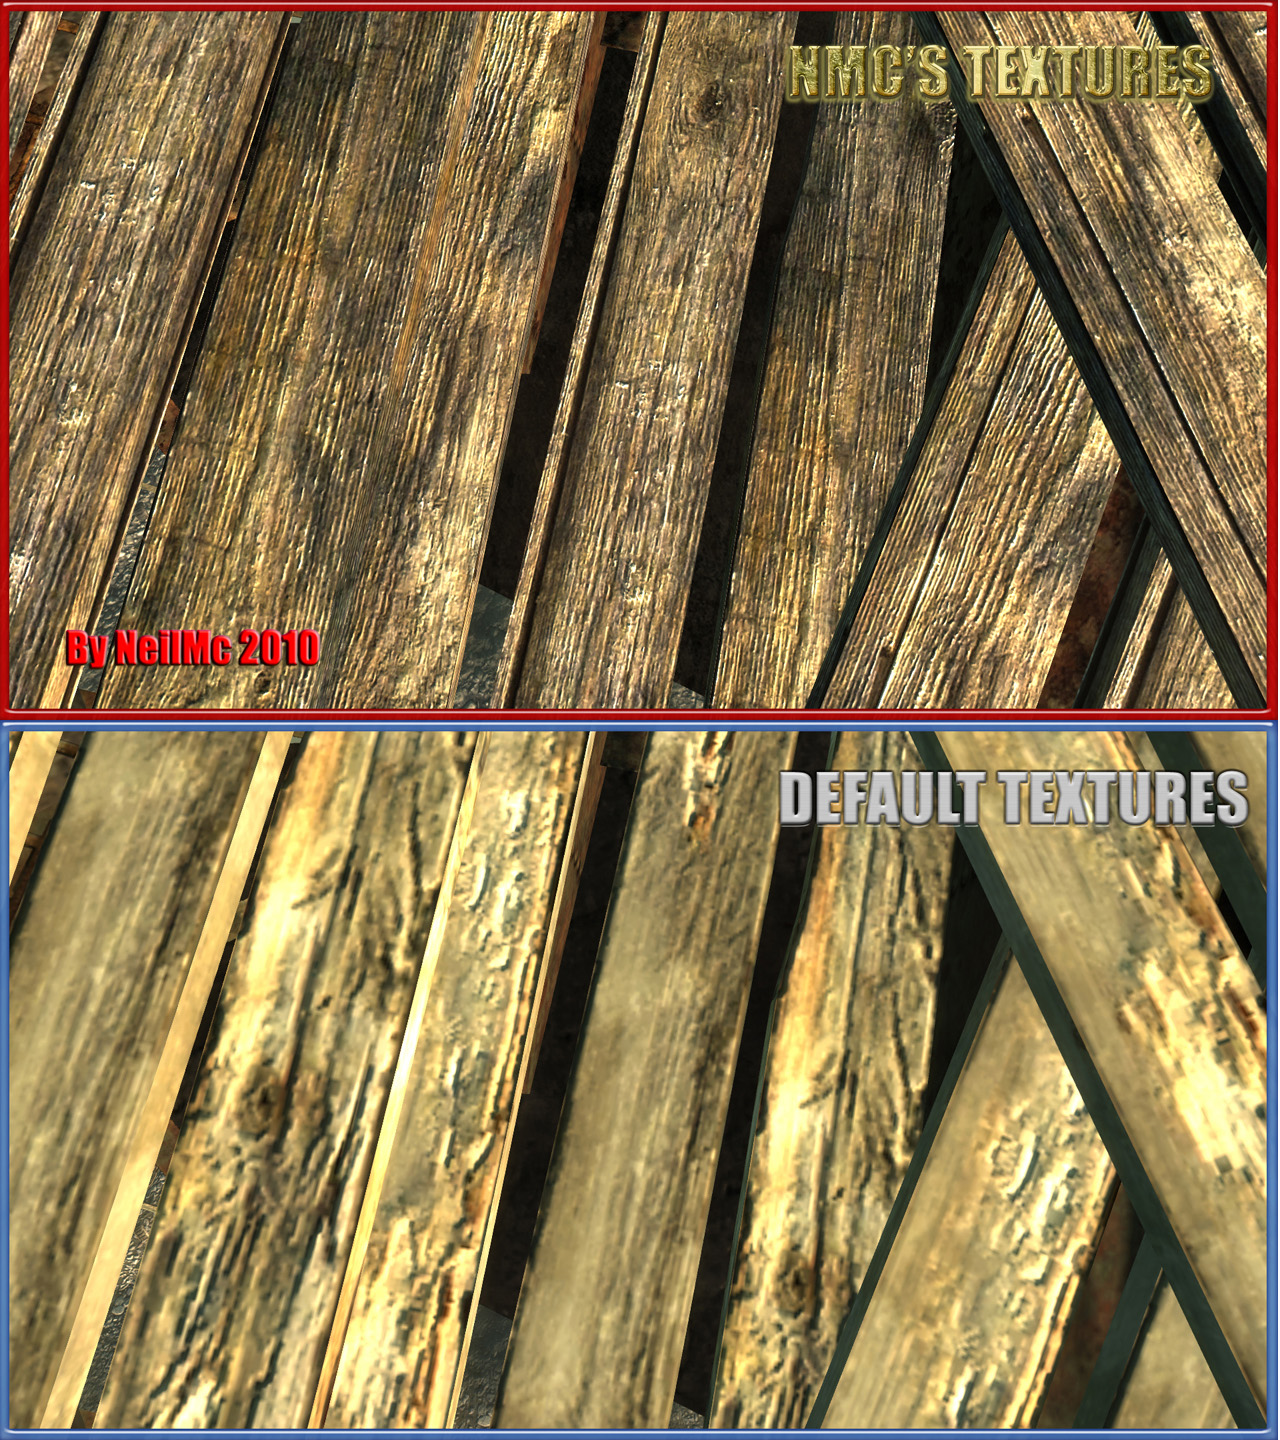 fallout 3 texture mods not working